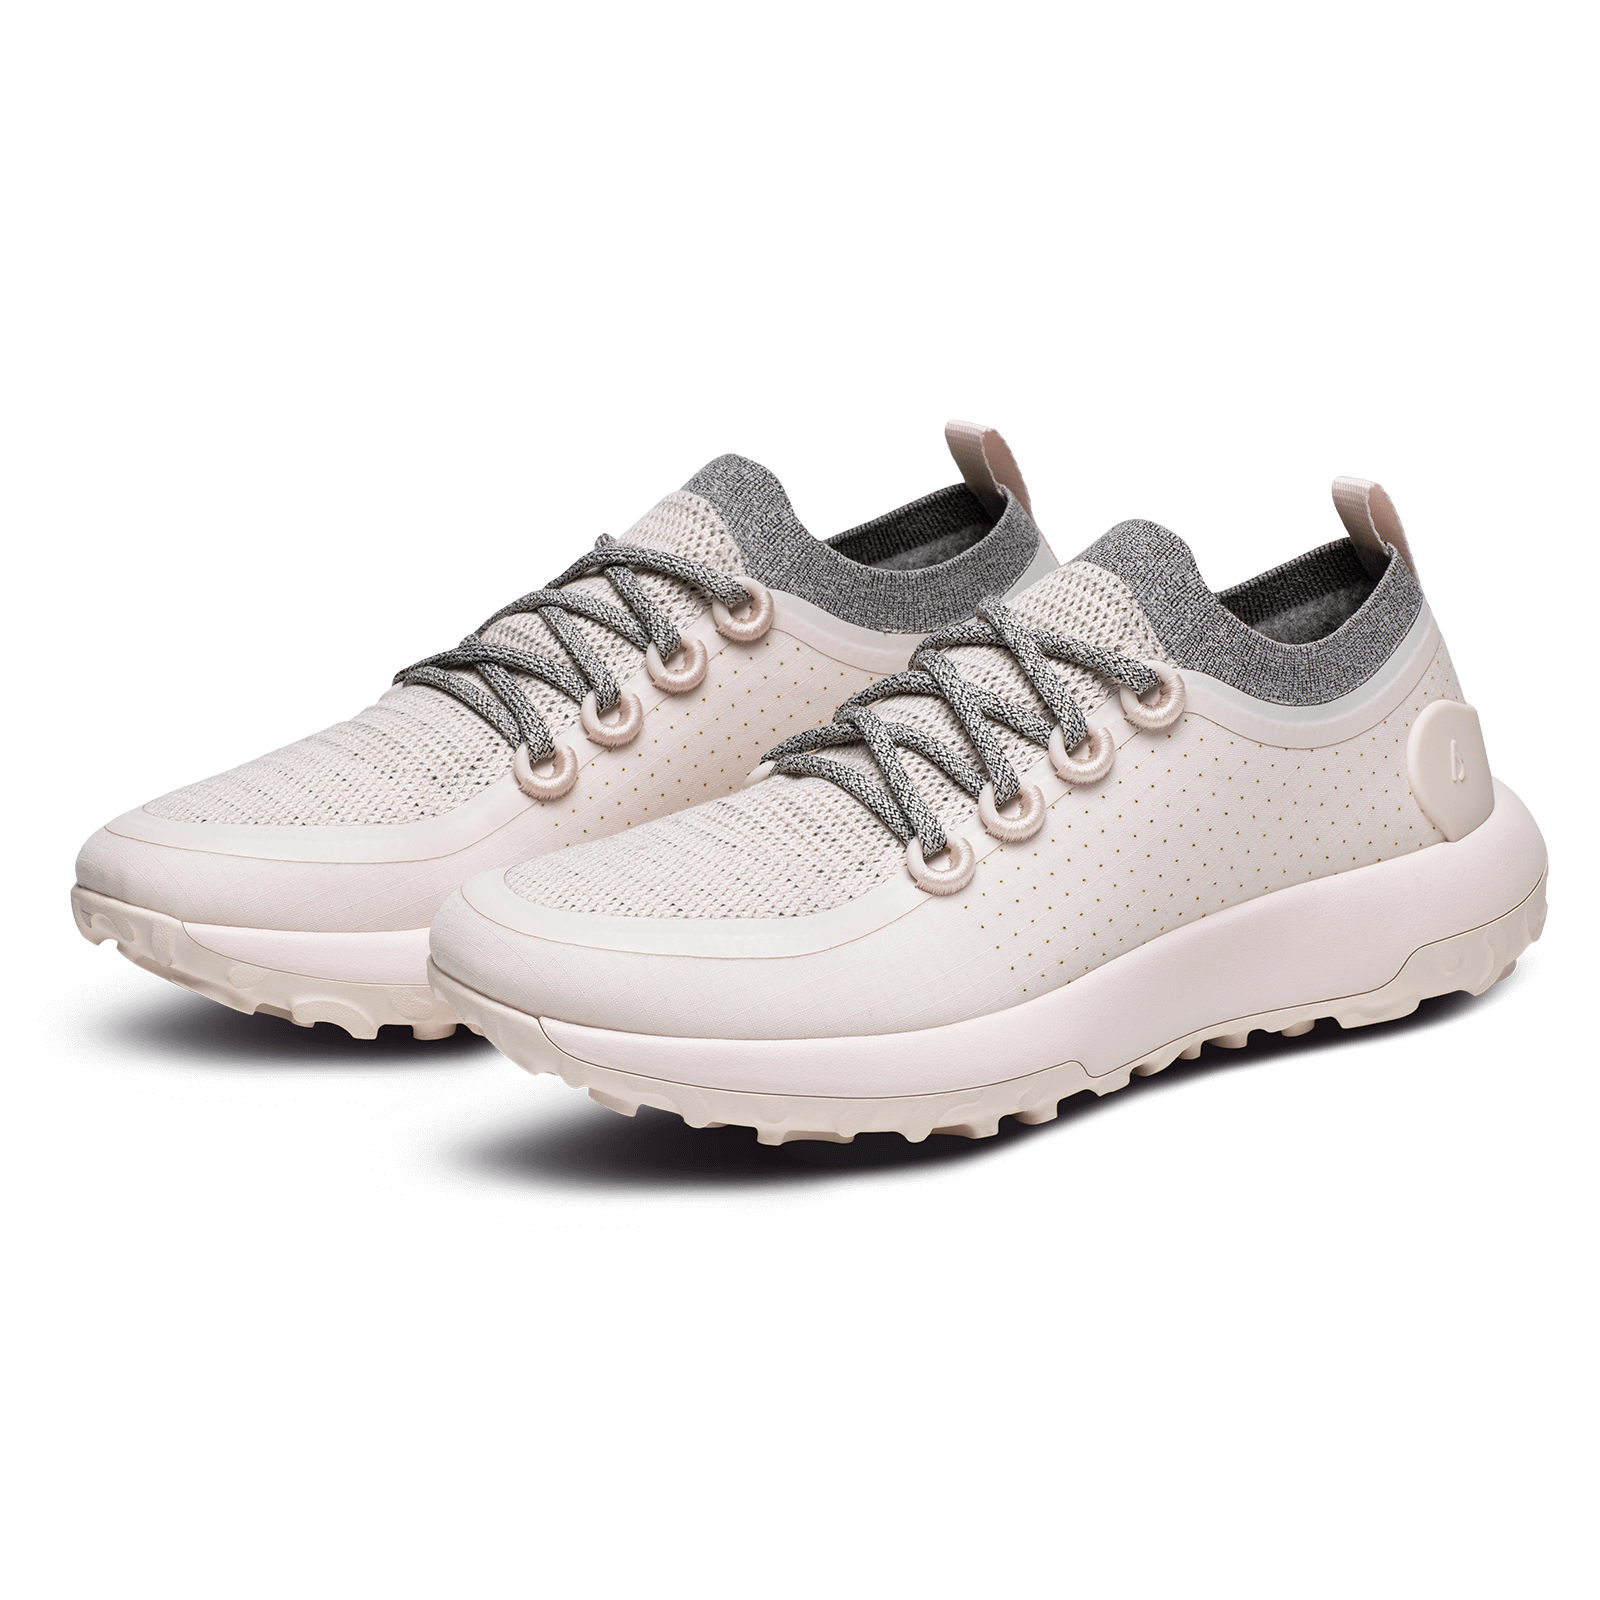 Women's Trail Runners SWT - Calm Taupe (Calm Taupe Sole)